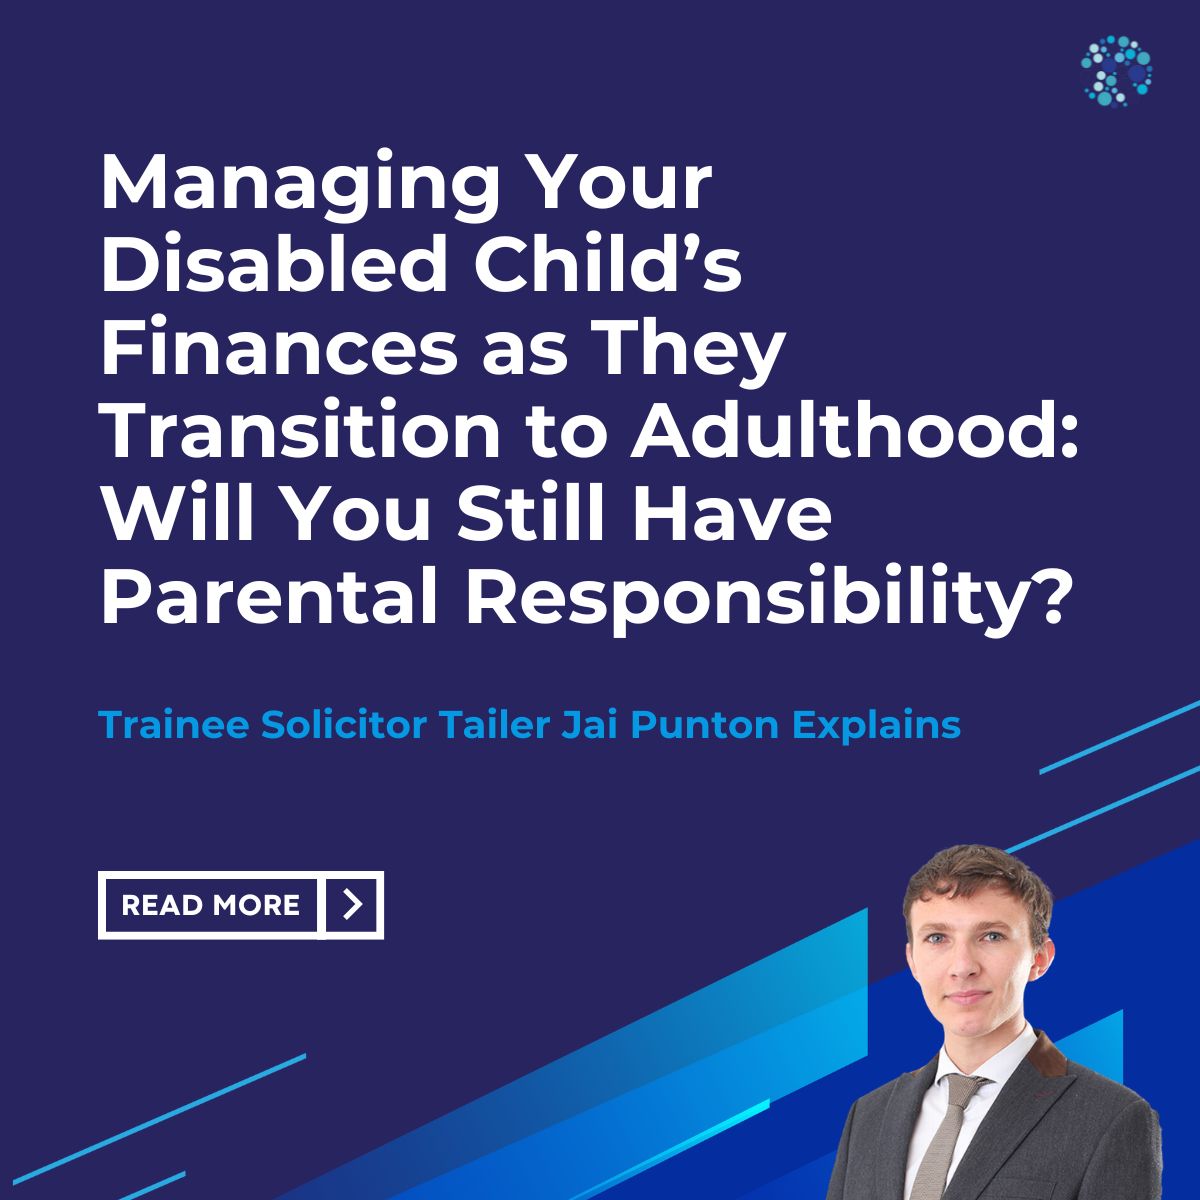 If you're a parent of a #disabled child, your child's transition to 18 years old raises important decisions about their care & financial future. Trainee Tailer Jai Punton explains how you can manage your disabled child’s finances during this crucial time➡️ buff.ly/4bHx880